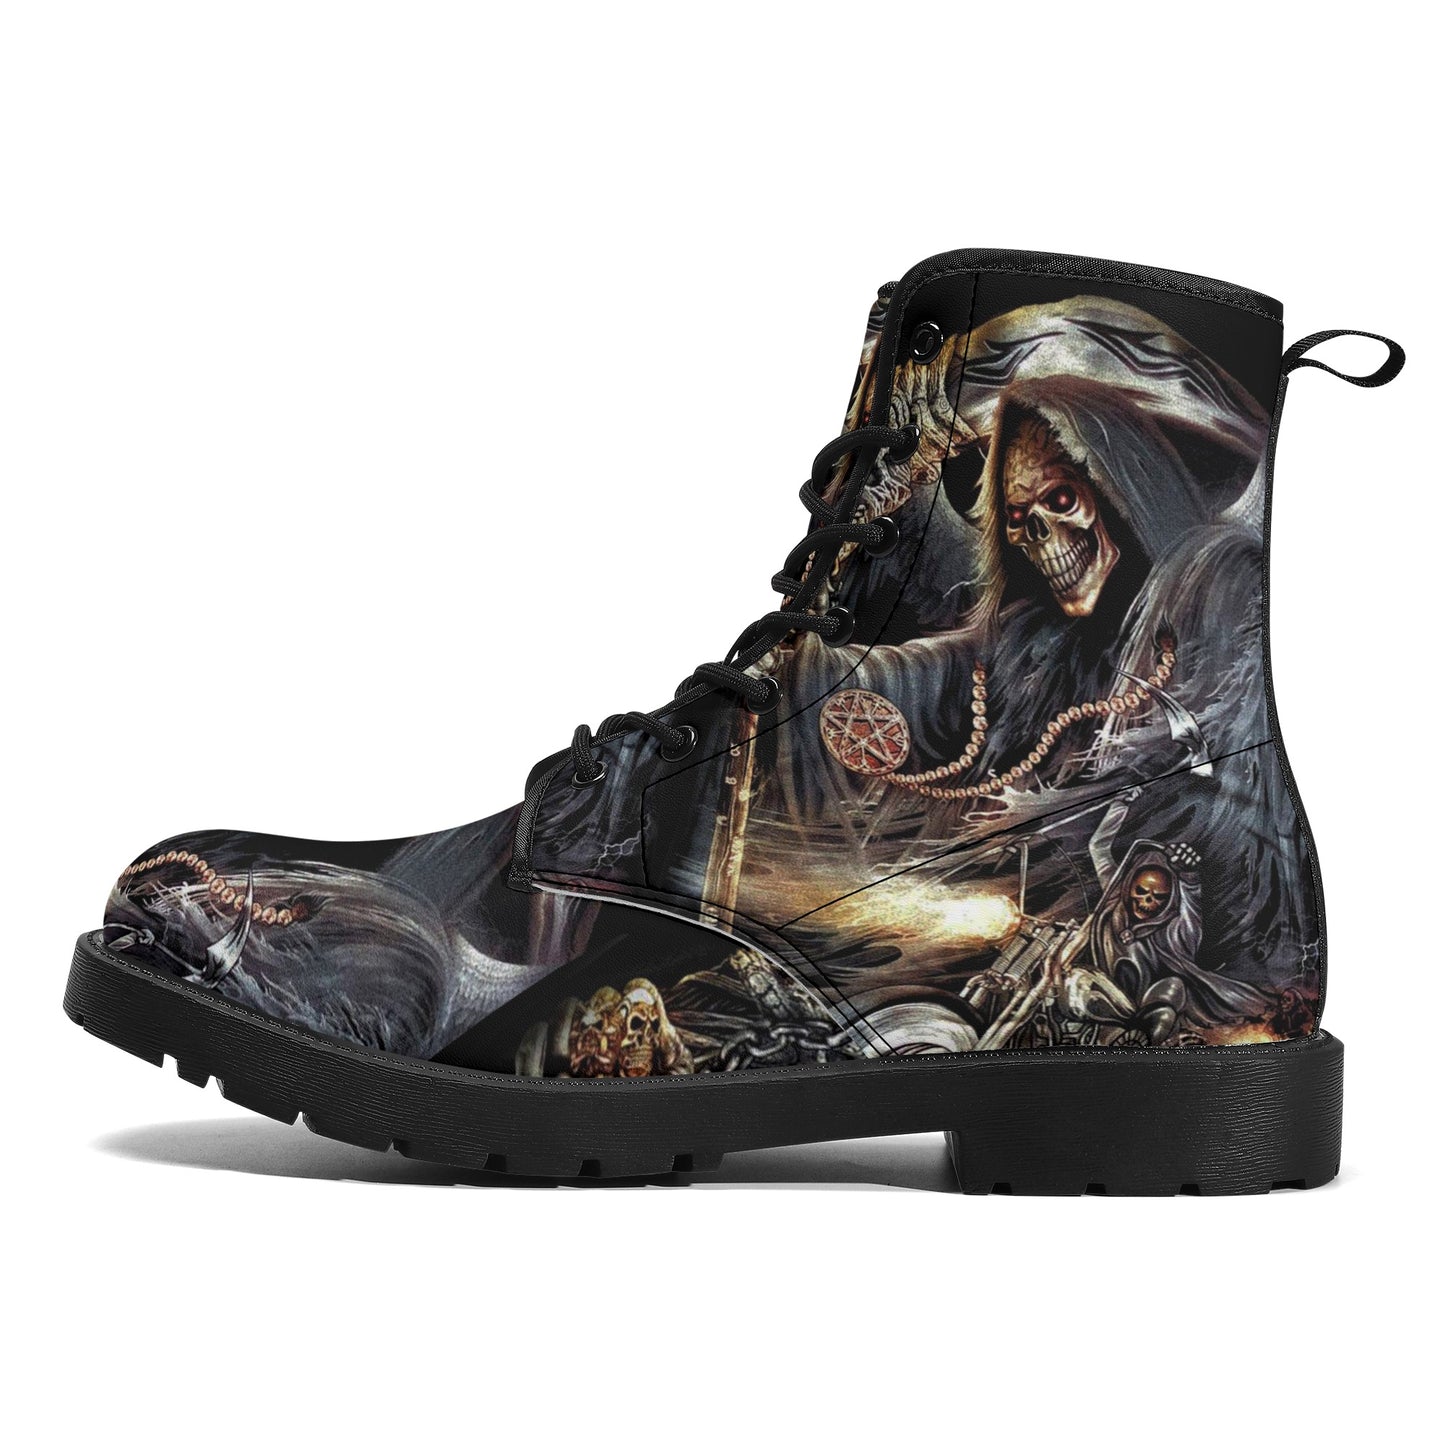 Skull boots, sugar skull leather boots, Halloween skeleton boots for women